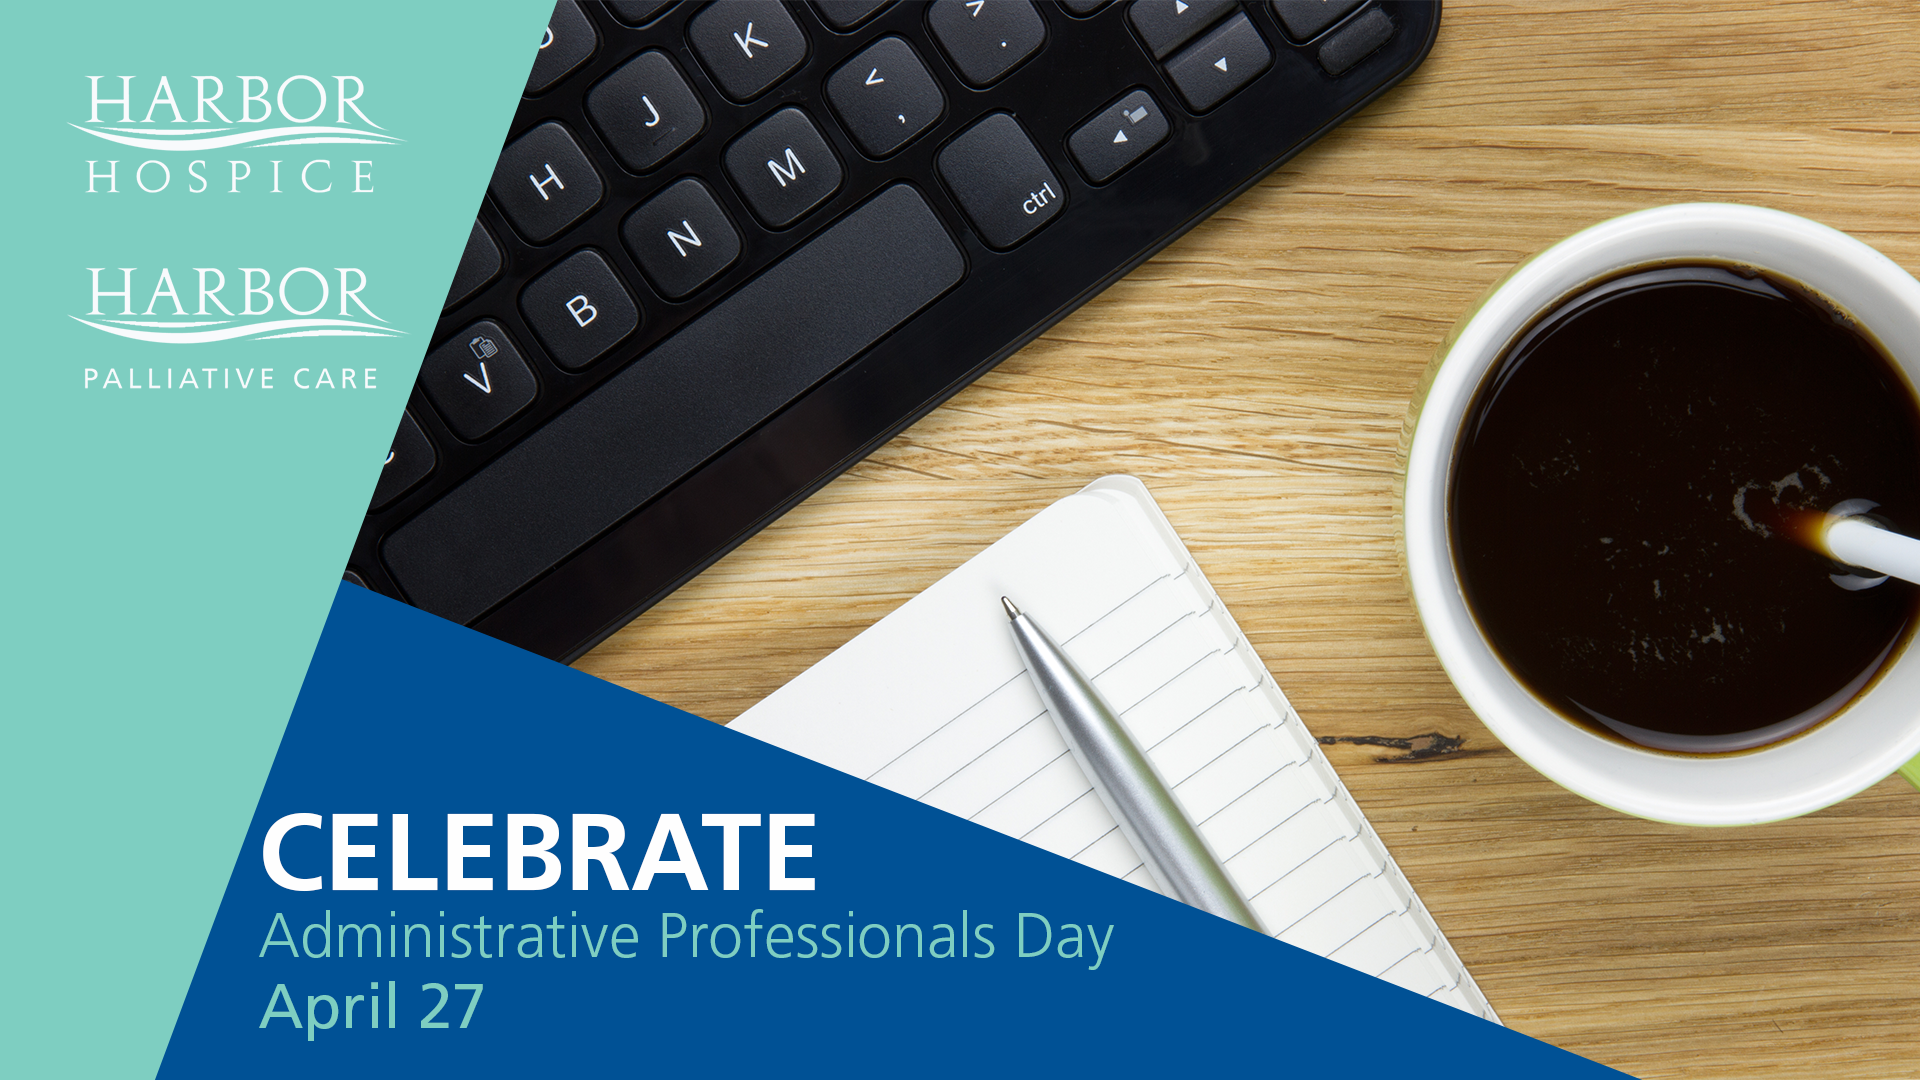 Announcement National Week Month Admin Prof Day - April 27 is Administrative Professionals Day!